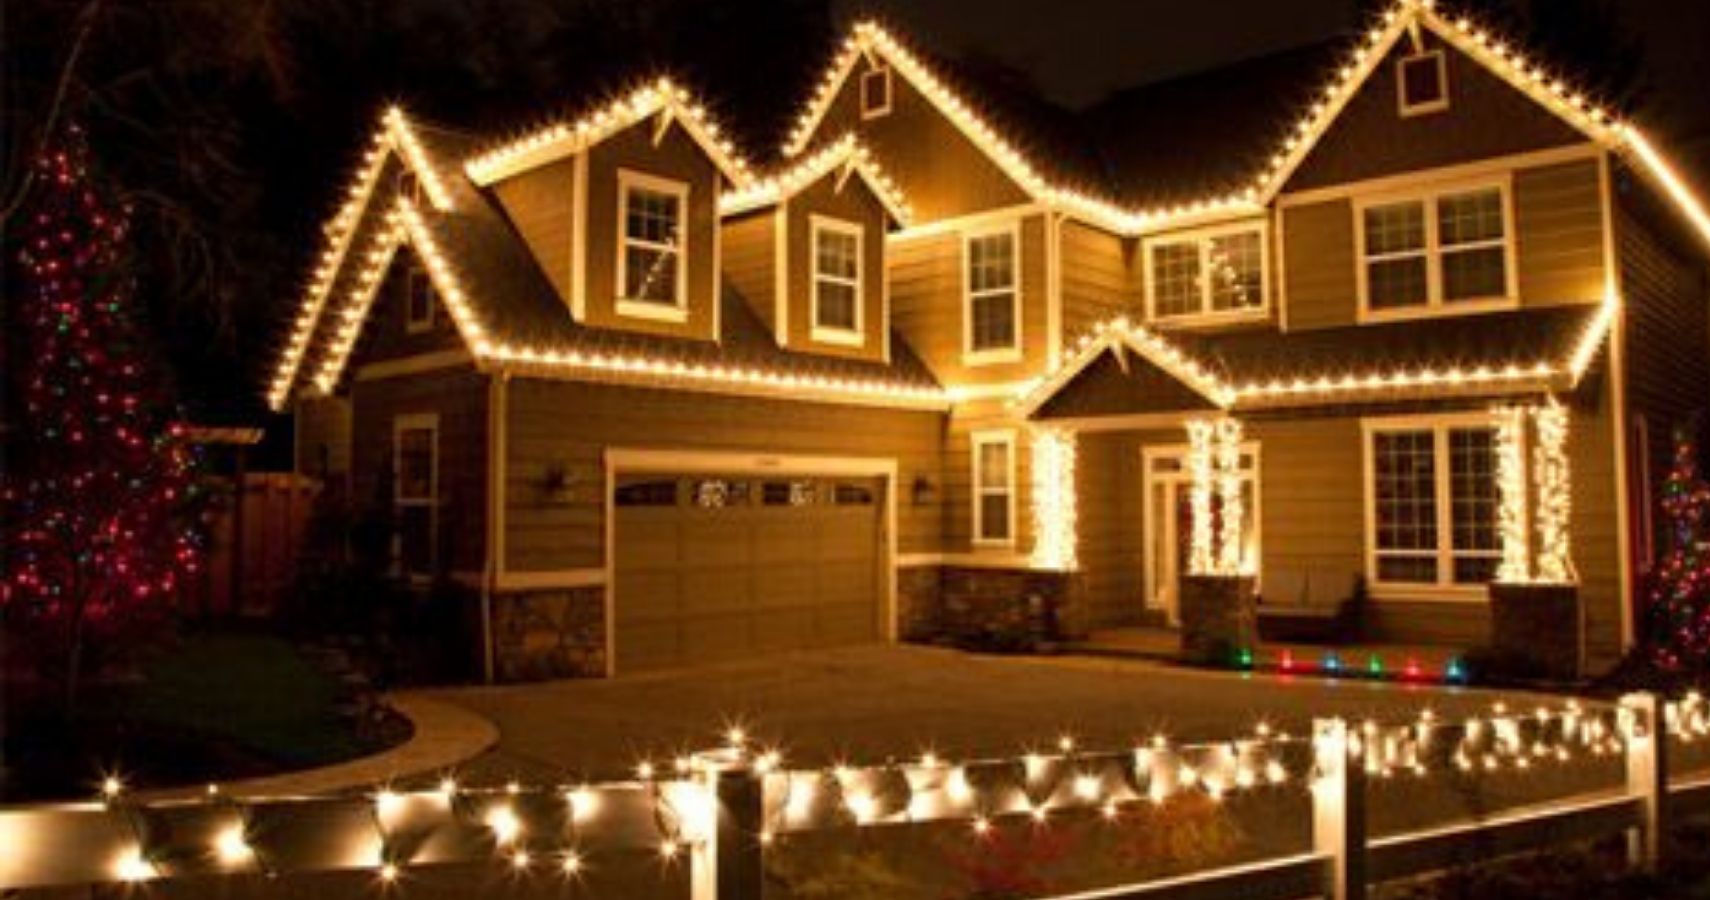 New Trend Has People Hang Up Christmas Lights To Bring Cheer